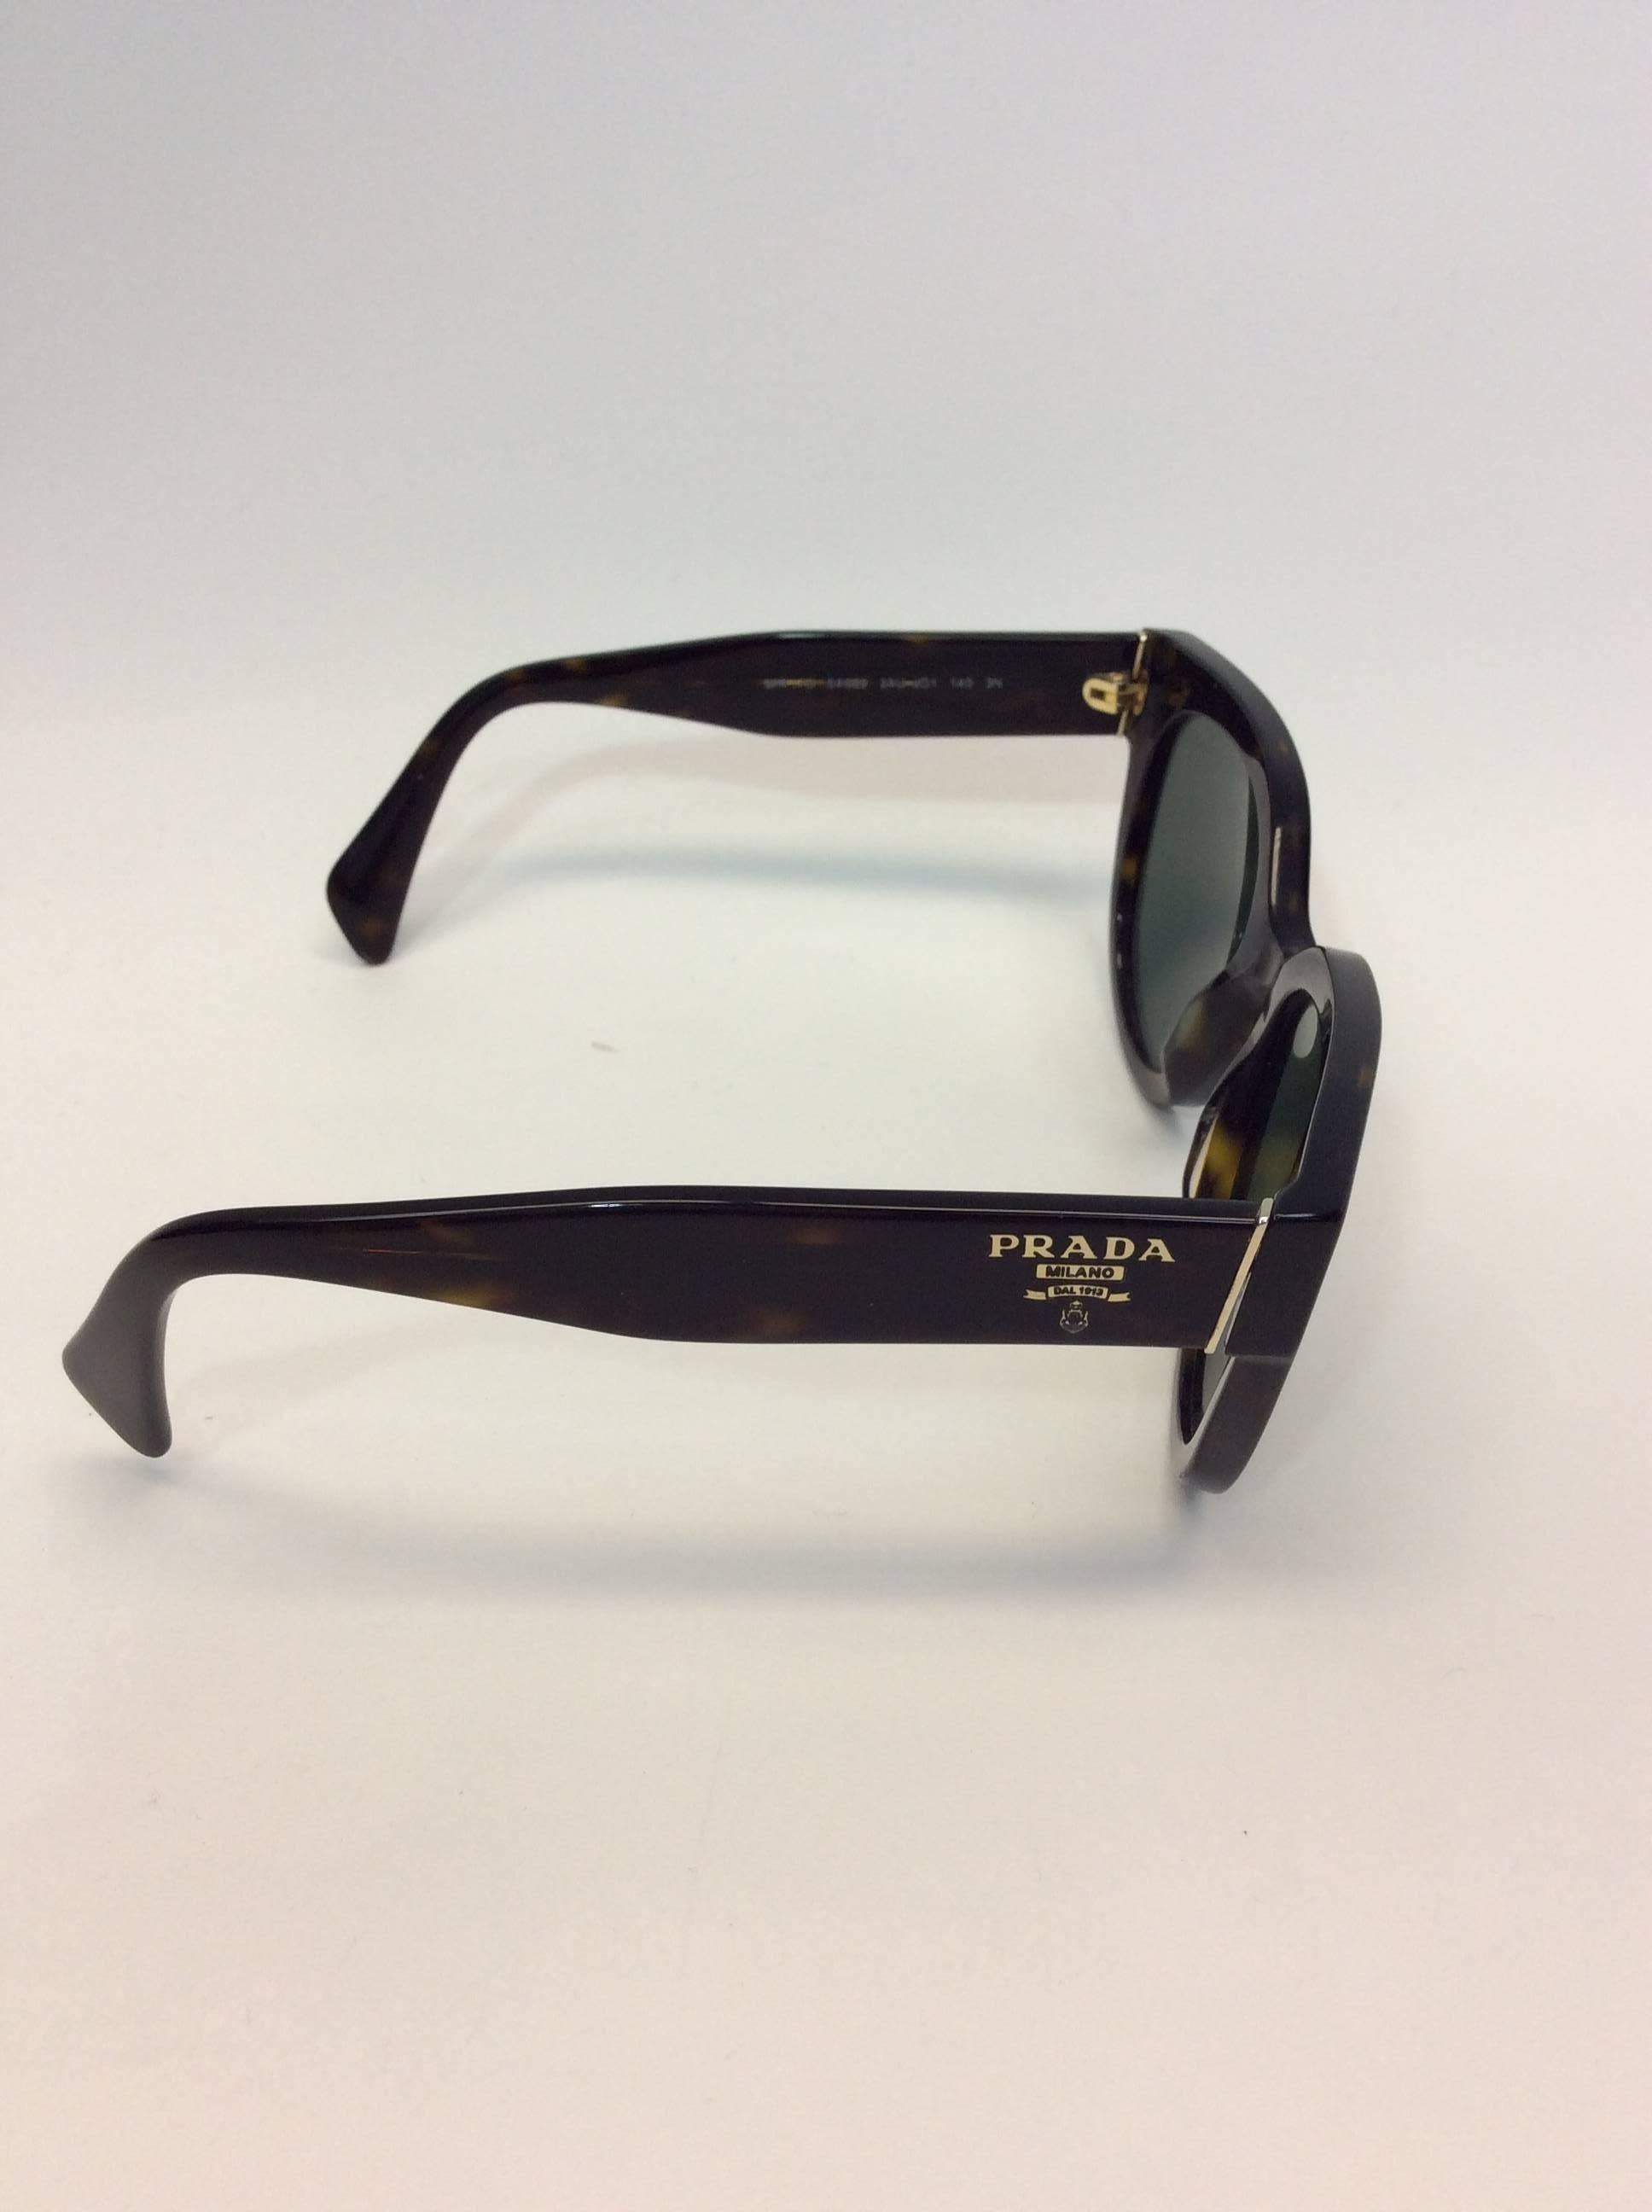 Prada Tortoiseshell Sunglasses
Dark tortoise style color
Embellished with the Prada logo on the temples
Small silver metal triangular detail on the frame corners
Made in Italy
$208
6.25 inches in length by 2.5 inches height
